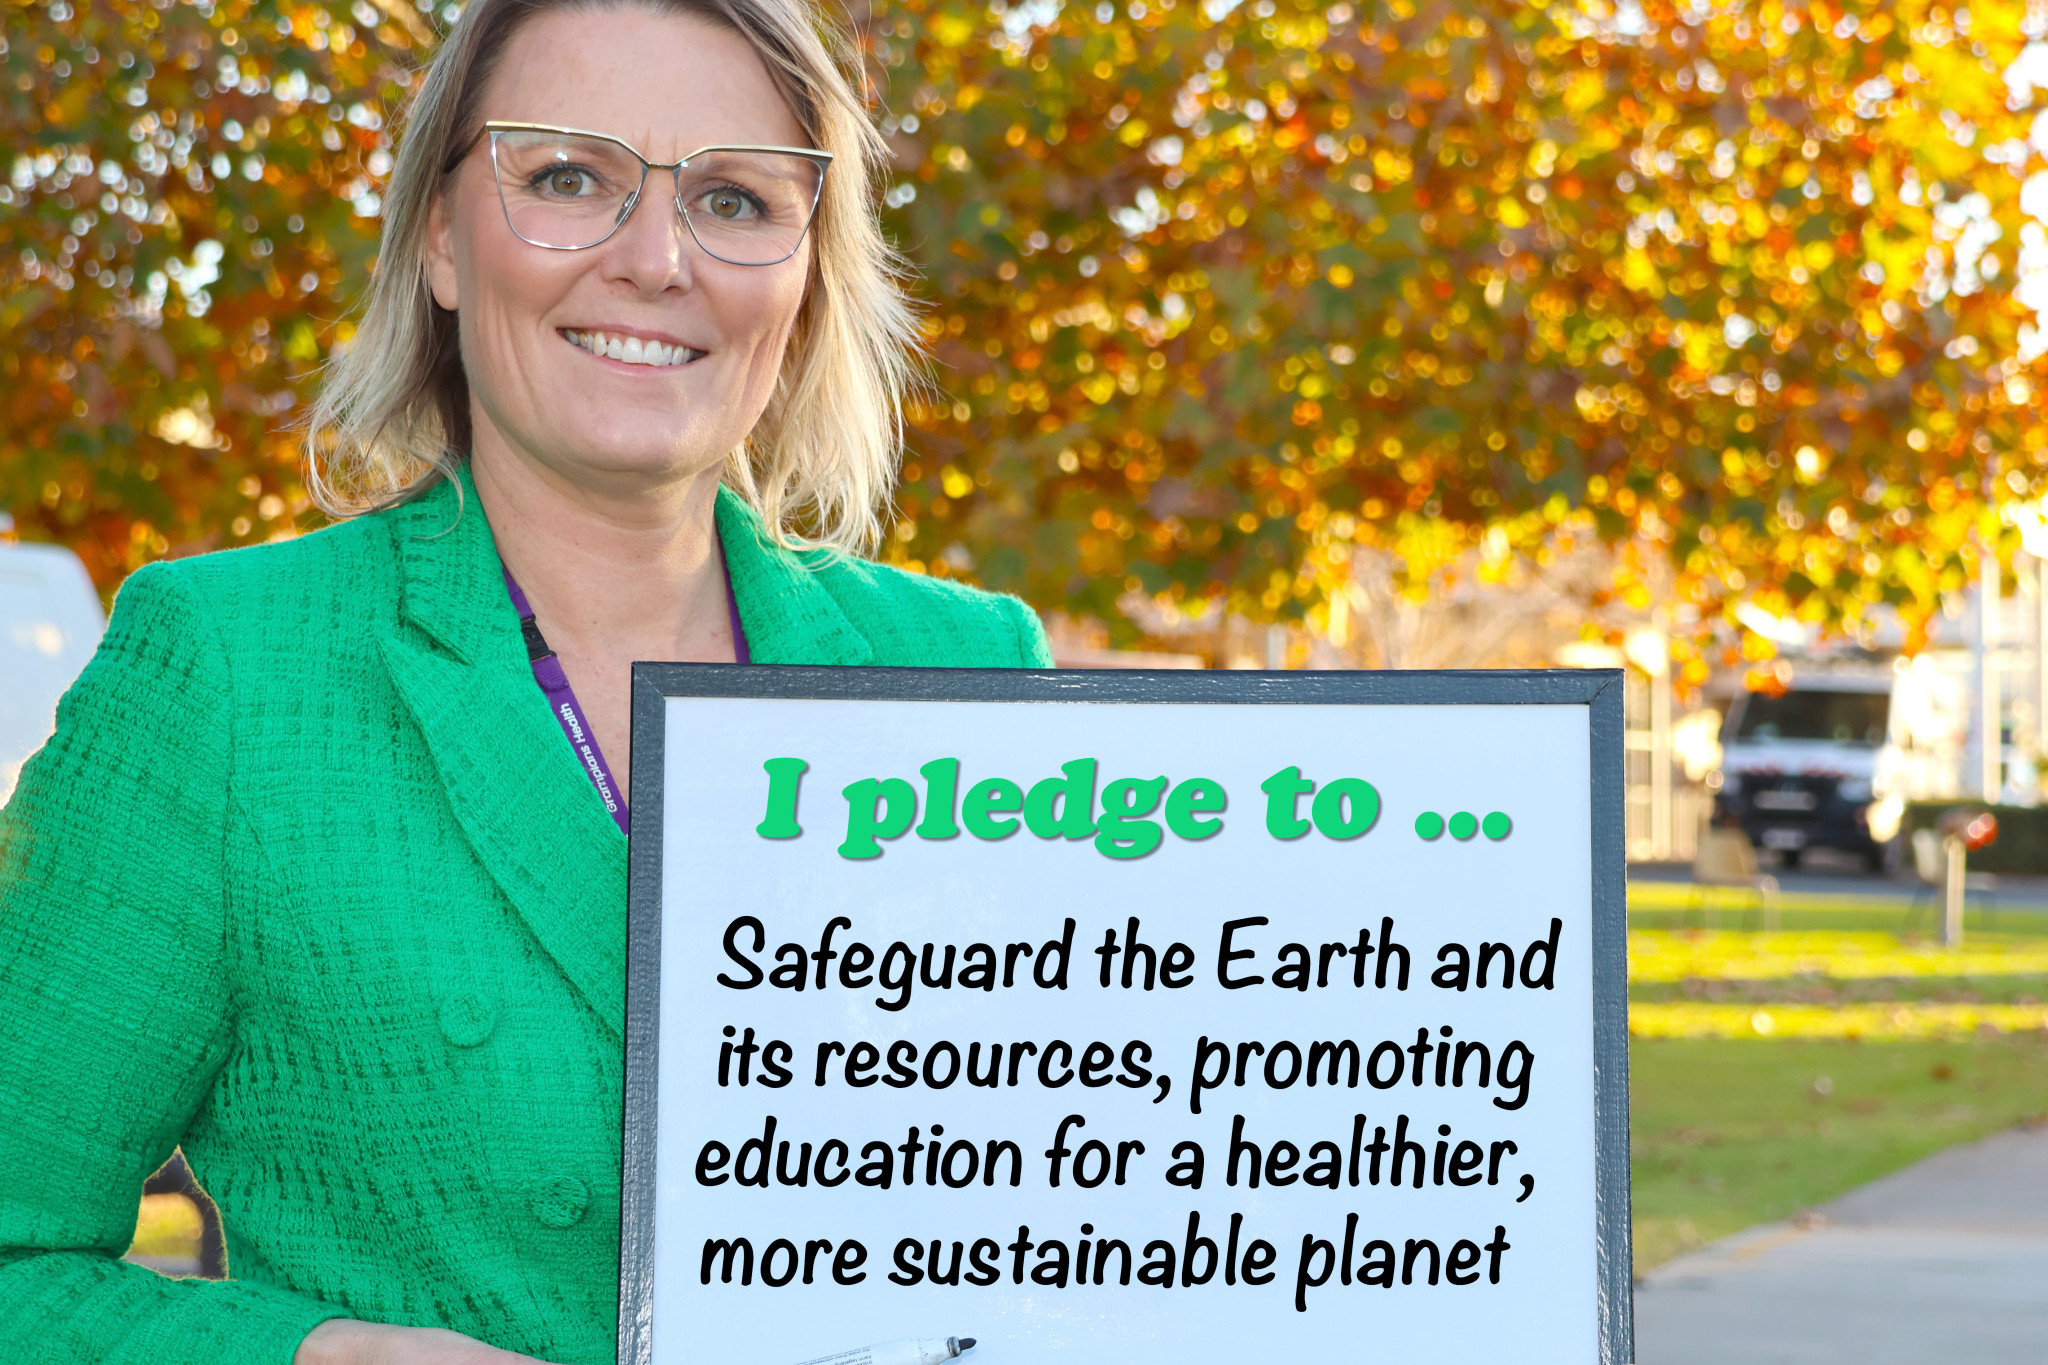 As part of the launch of Grampians Health’s Environmental Sustainability Plan, environmental and sustainability officer Sam Harris has made a pledge to help safeguard the planet.